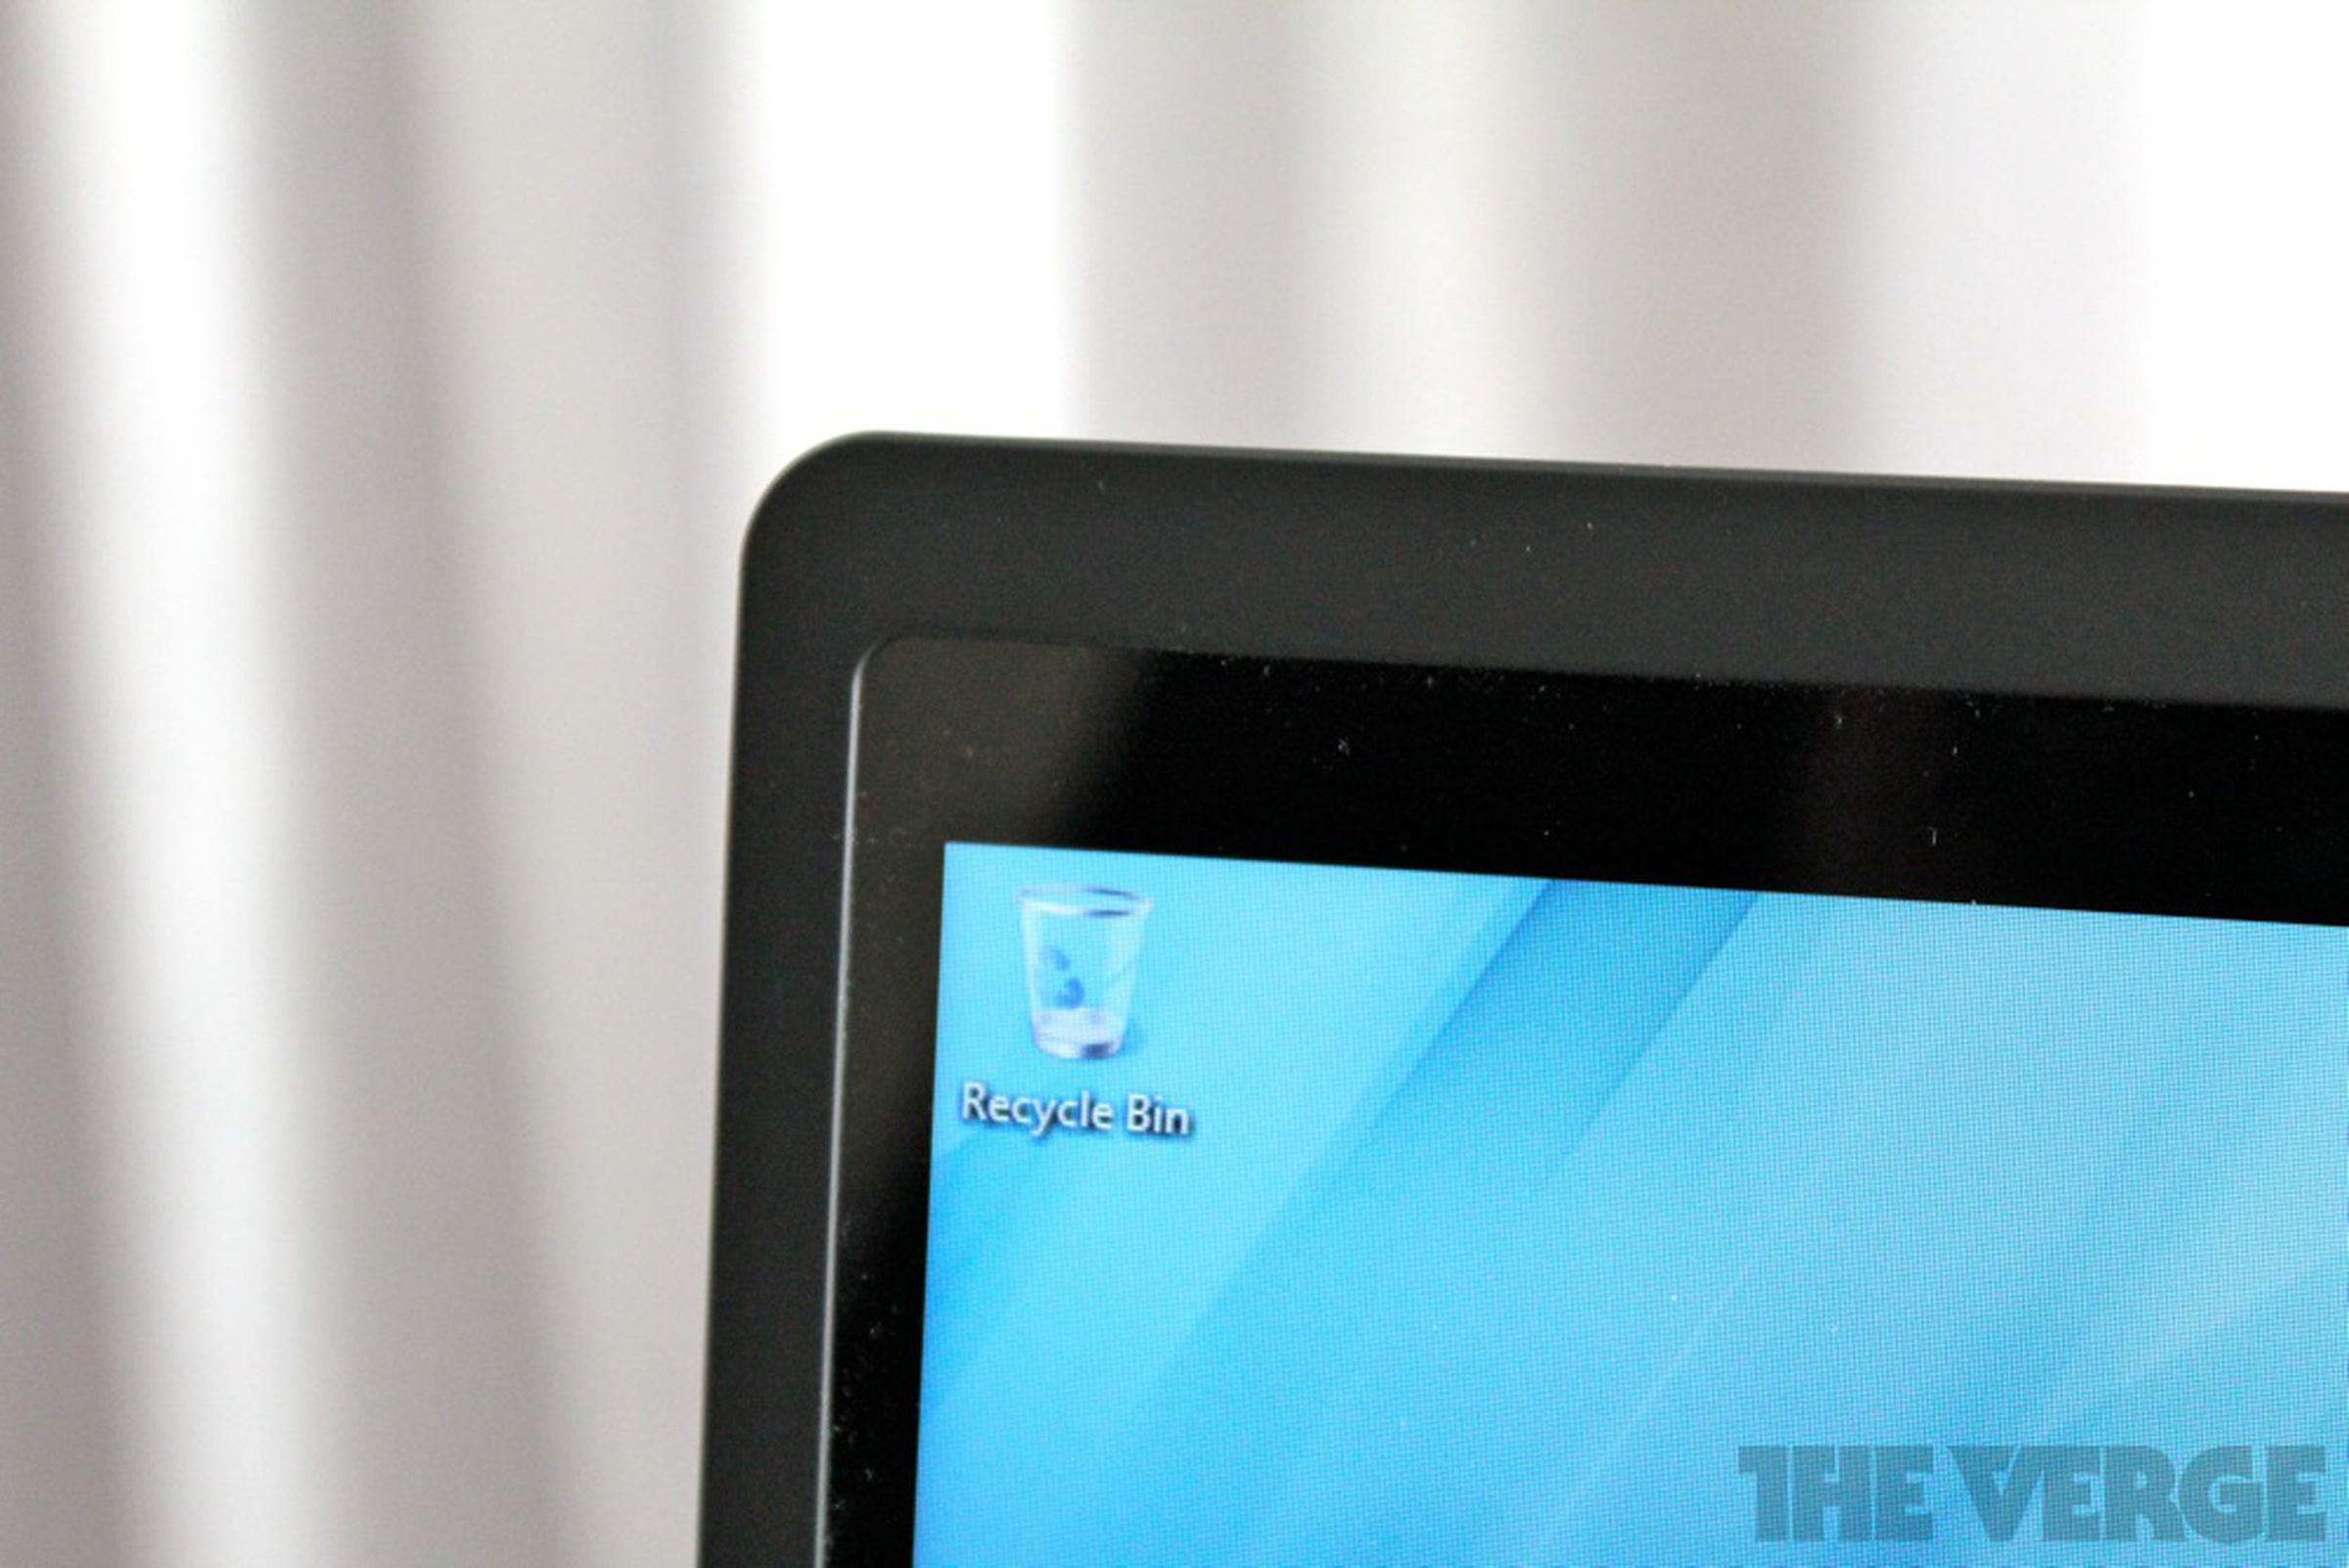 HP Folio 13 hands-on pictures 